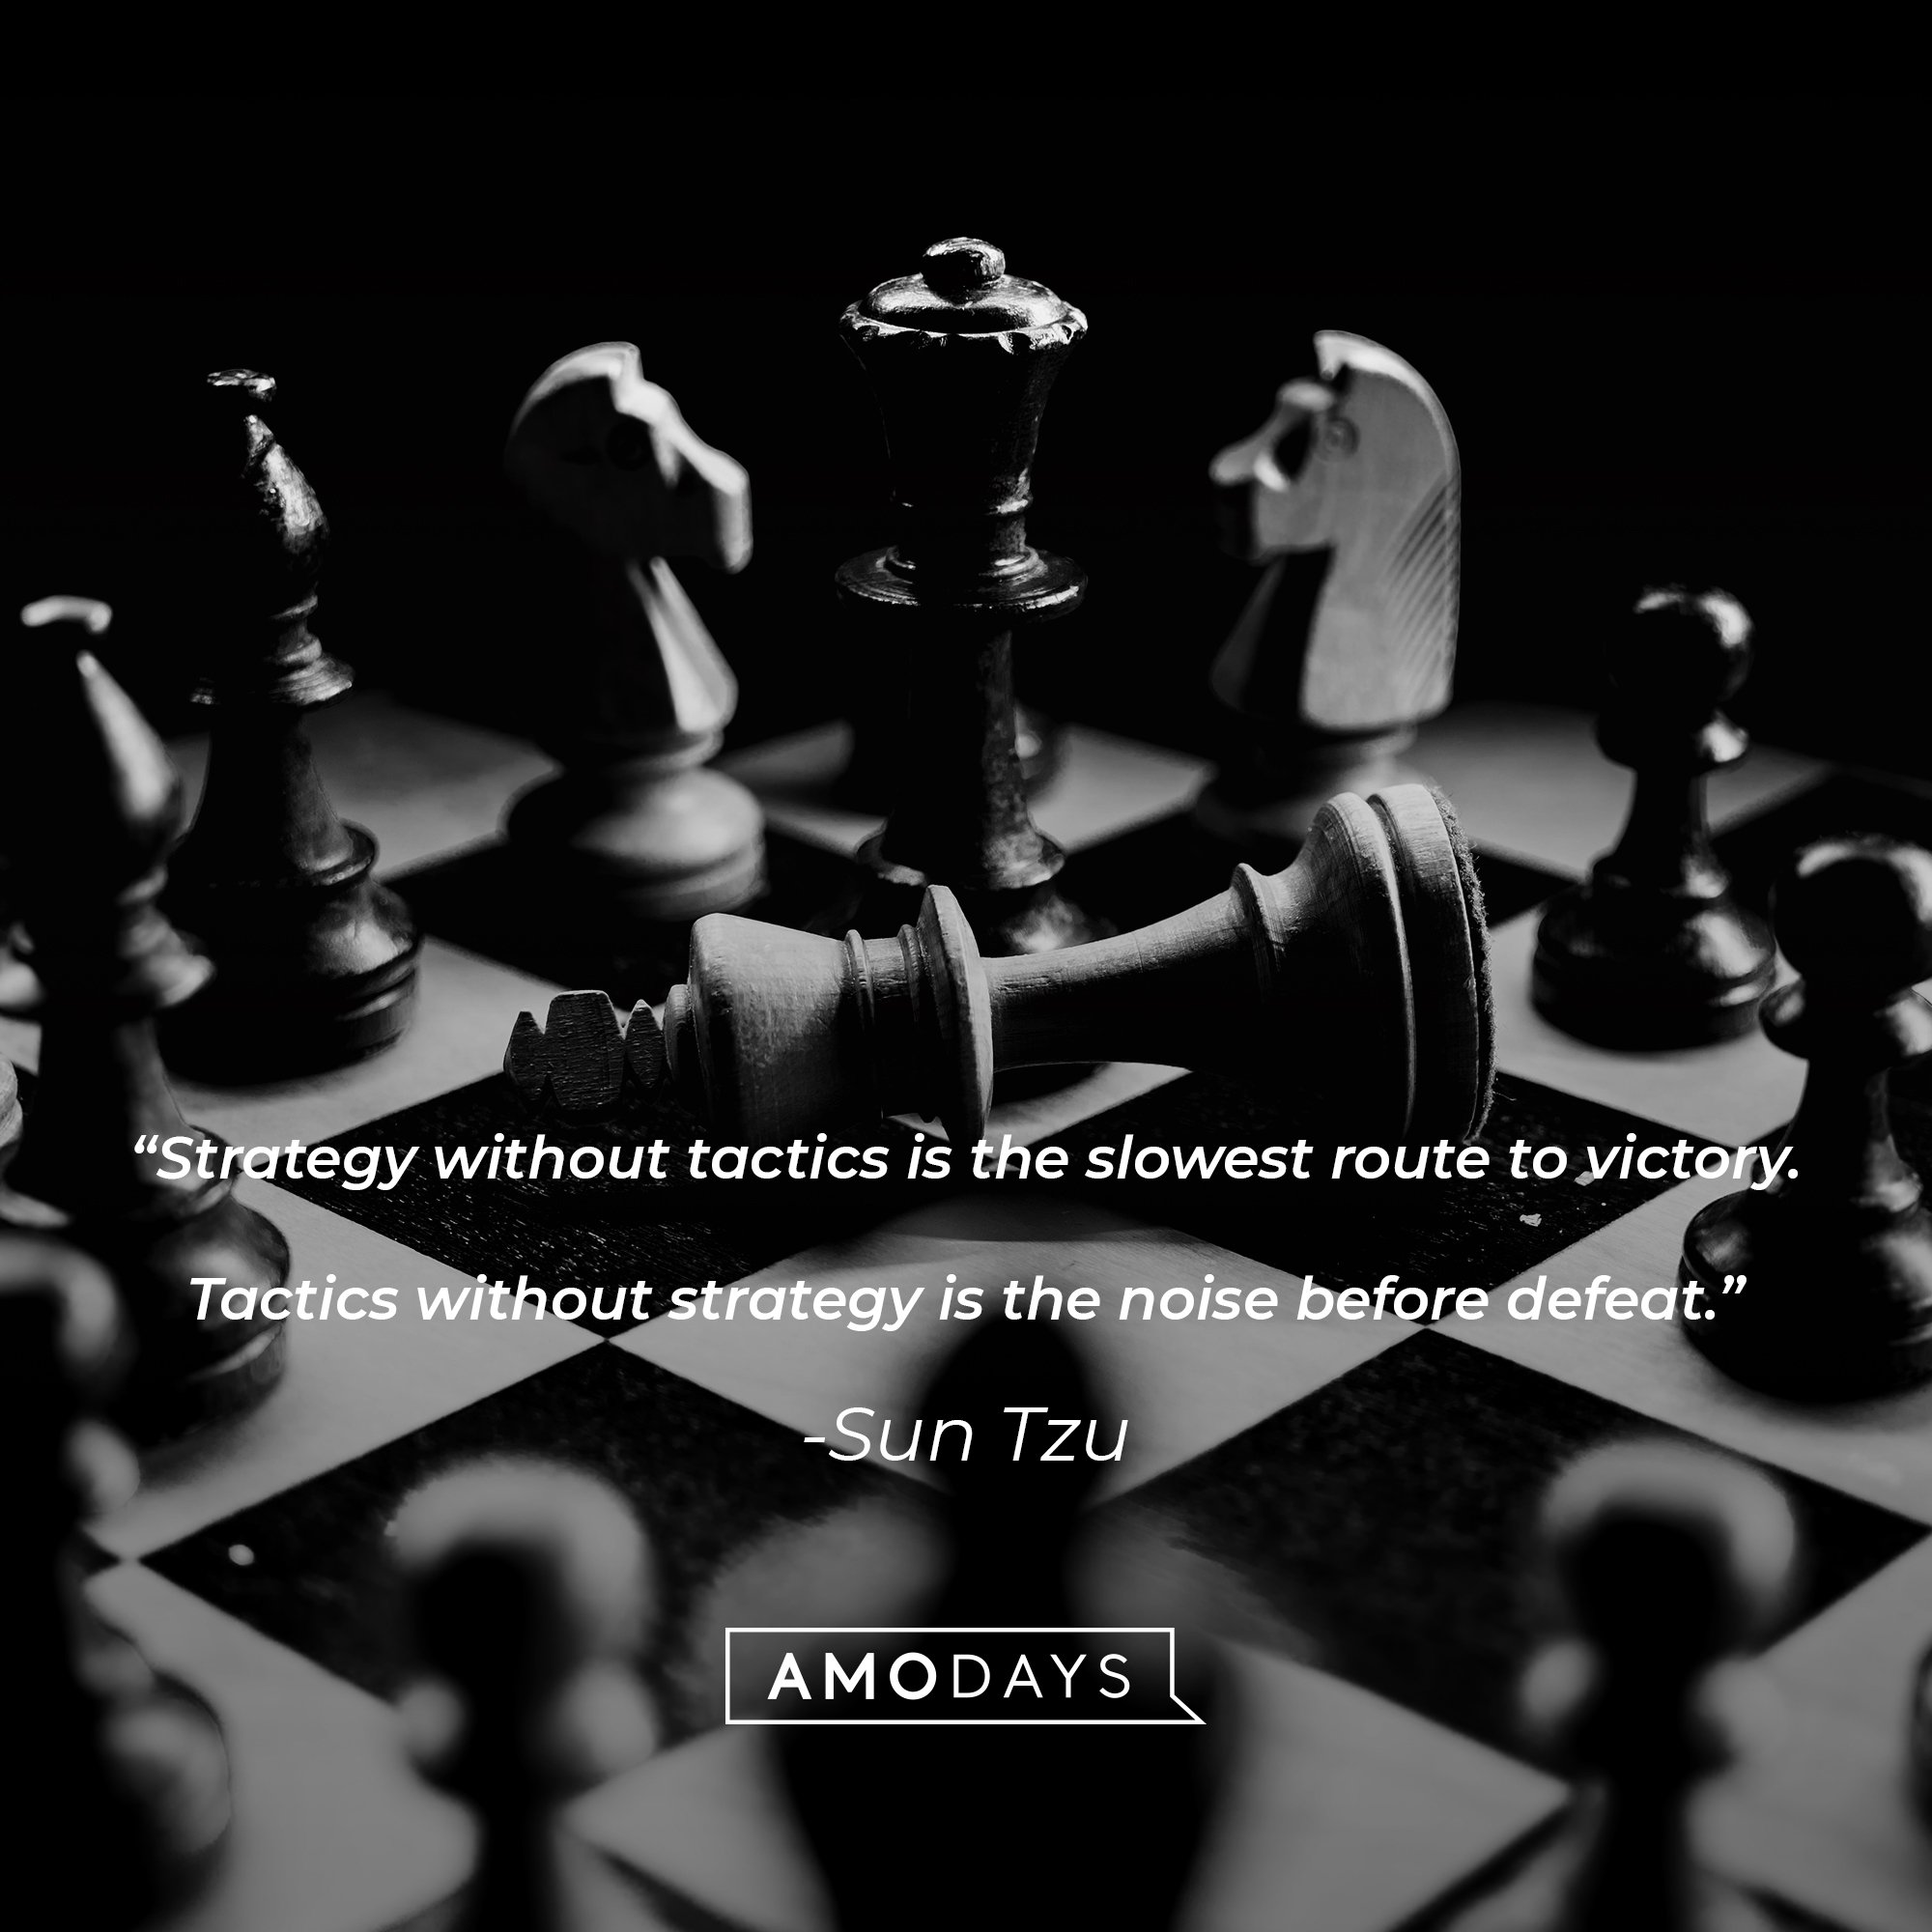 Sun Tzu's quote: "Strategy without tactics is the slowest route to victory. Tactics without strategy is the noise before defeat." | Image: AmoDays